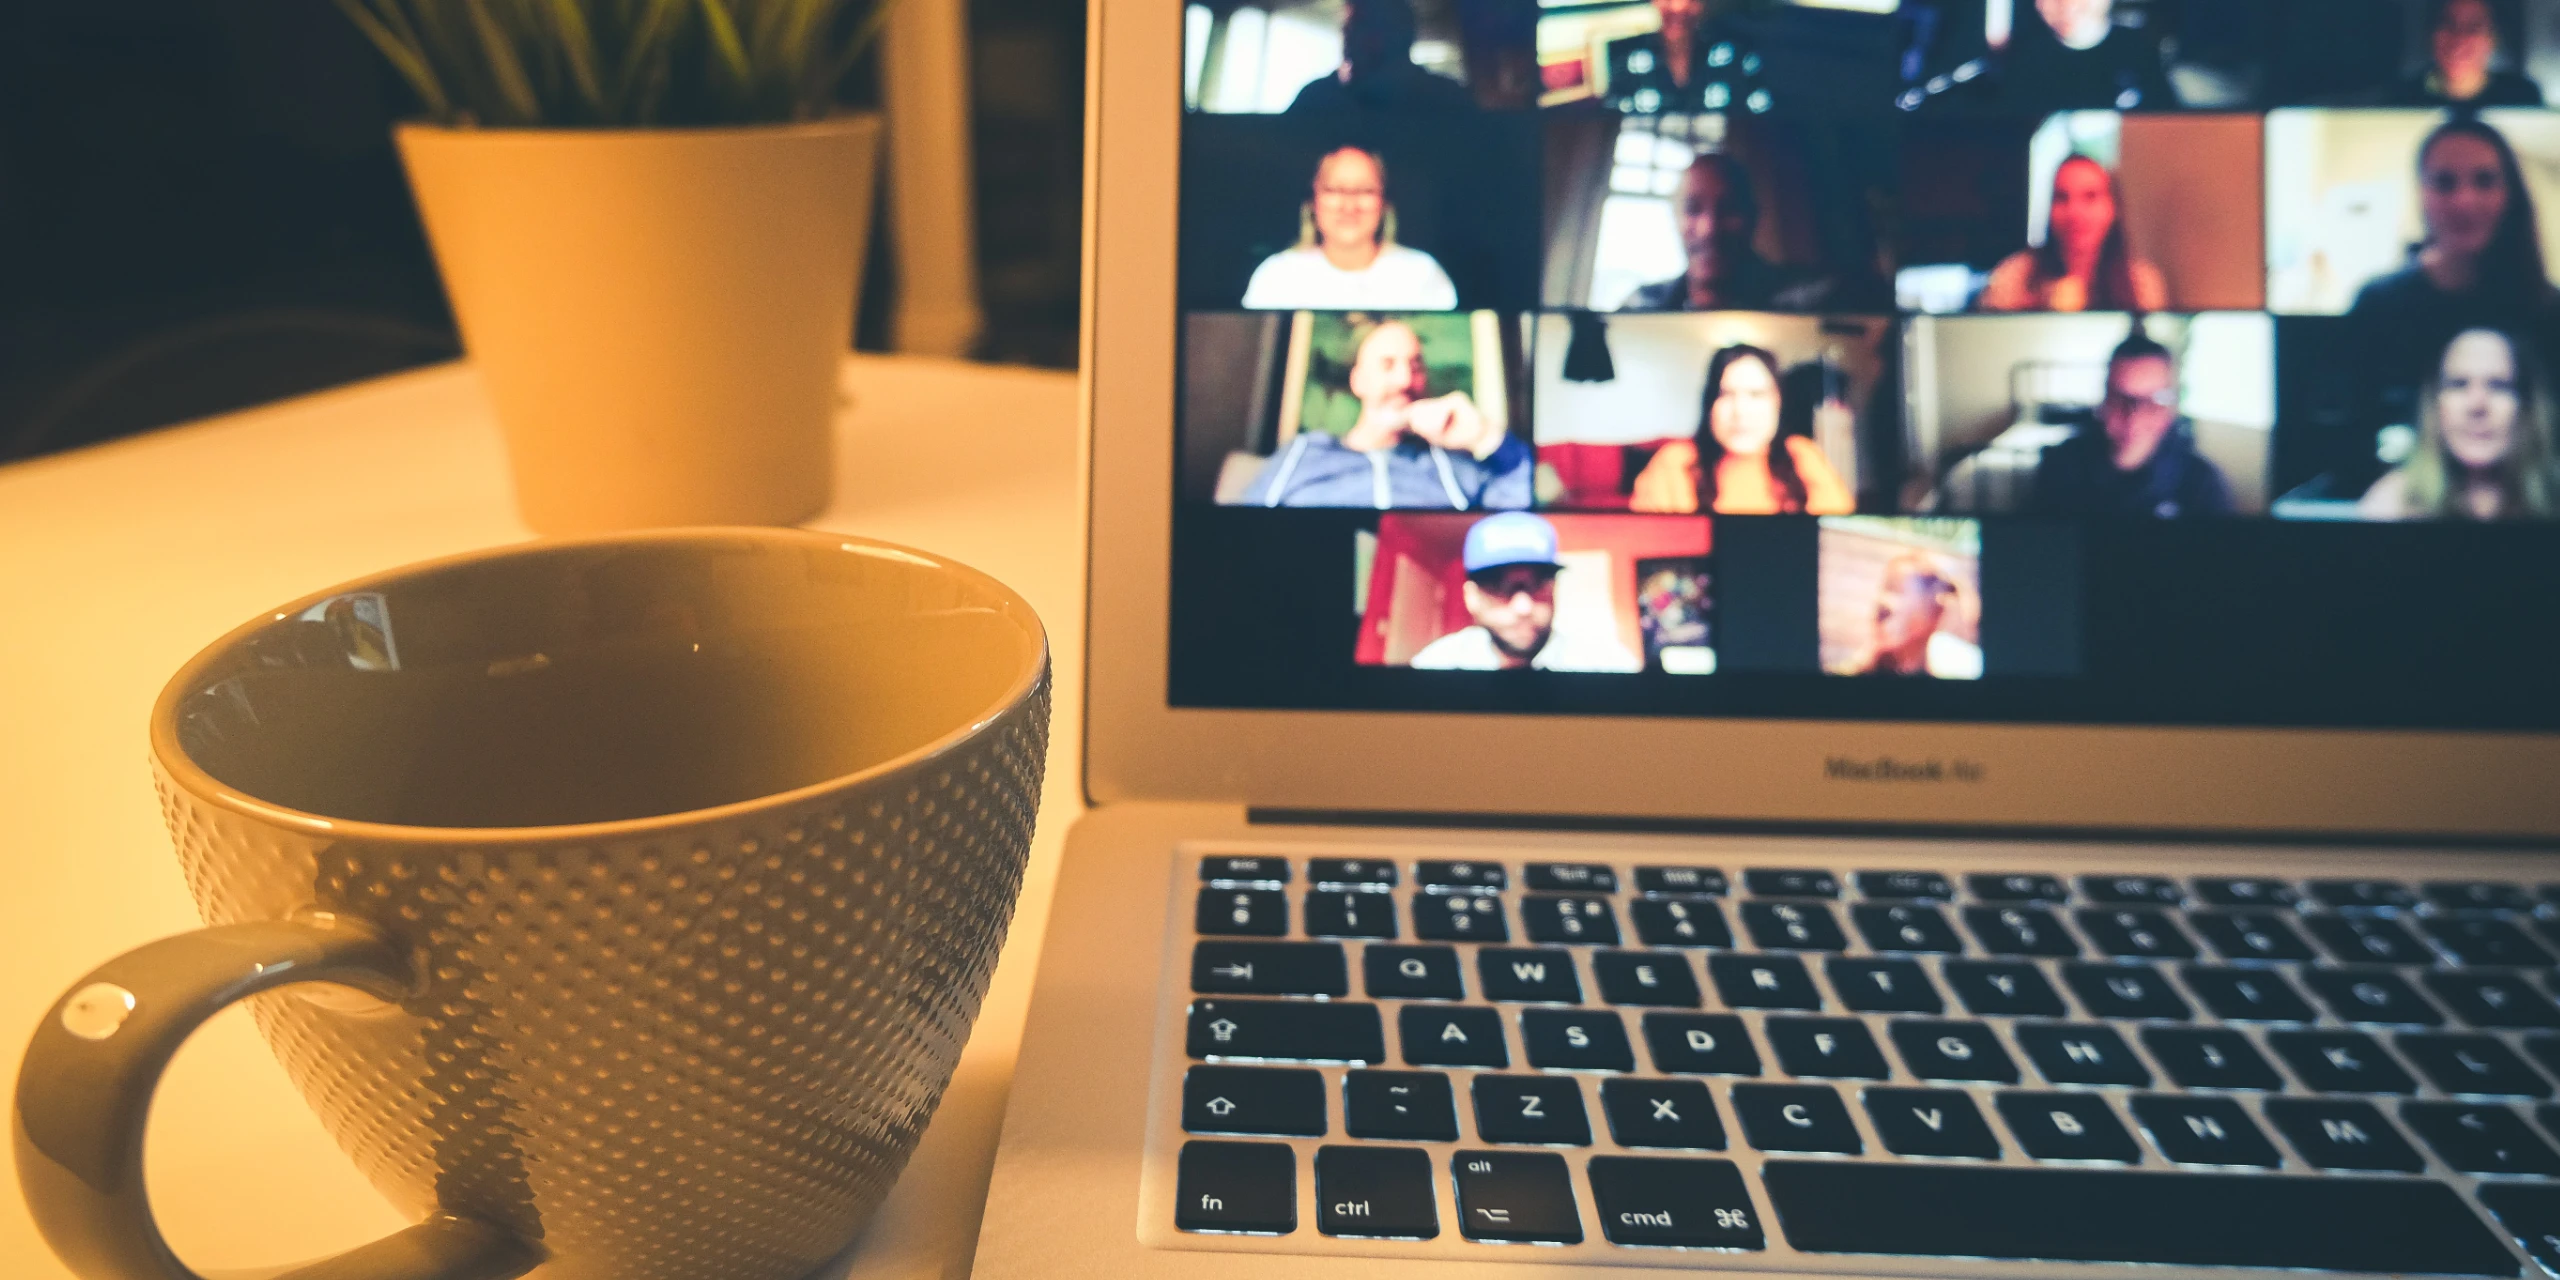 Image of a notebook with online meeting on a screen and coffee mug